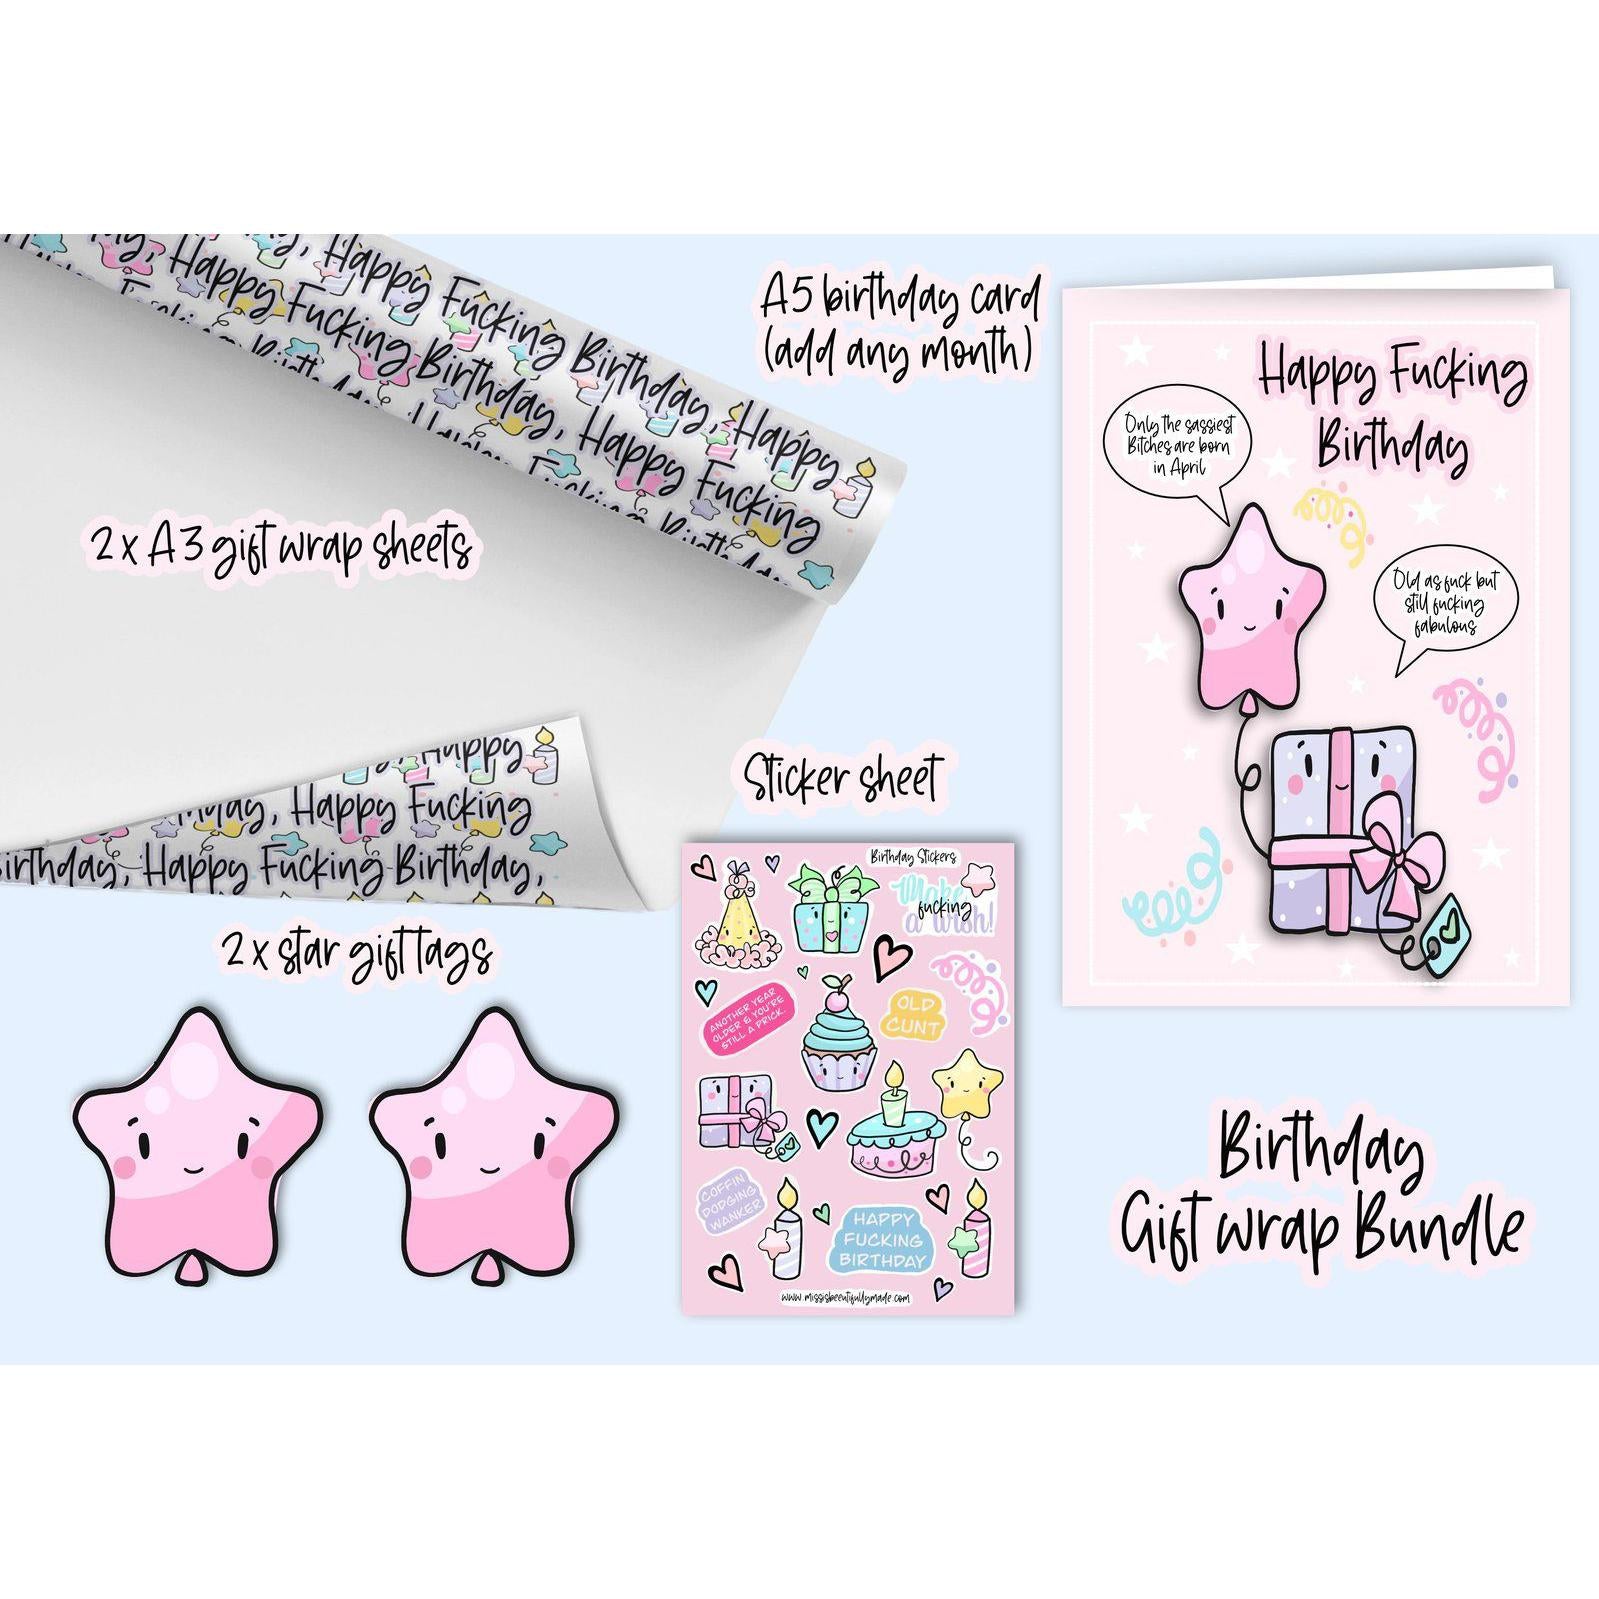 birthday gift wrap bundle with a cute kawaii design. Contains 2 A3 gift wrap sheets, A5 card with custom month, sticker sheet, @ gift tags, all containing our hilarious sweary quotes i.e Happy fucking birthday, old cunt, coffin dodging wanker.